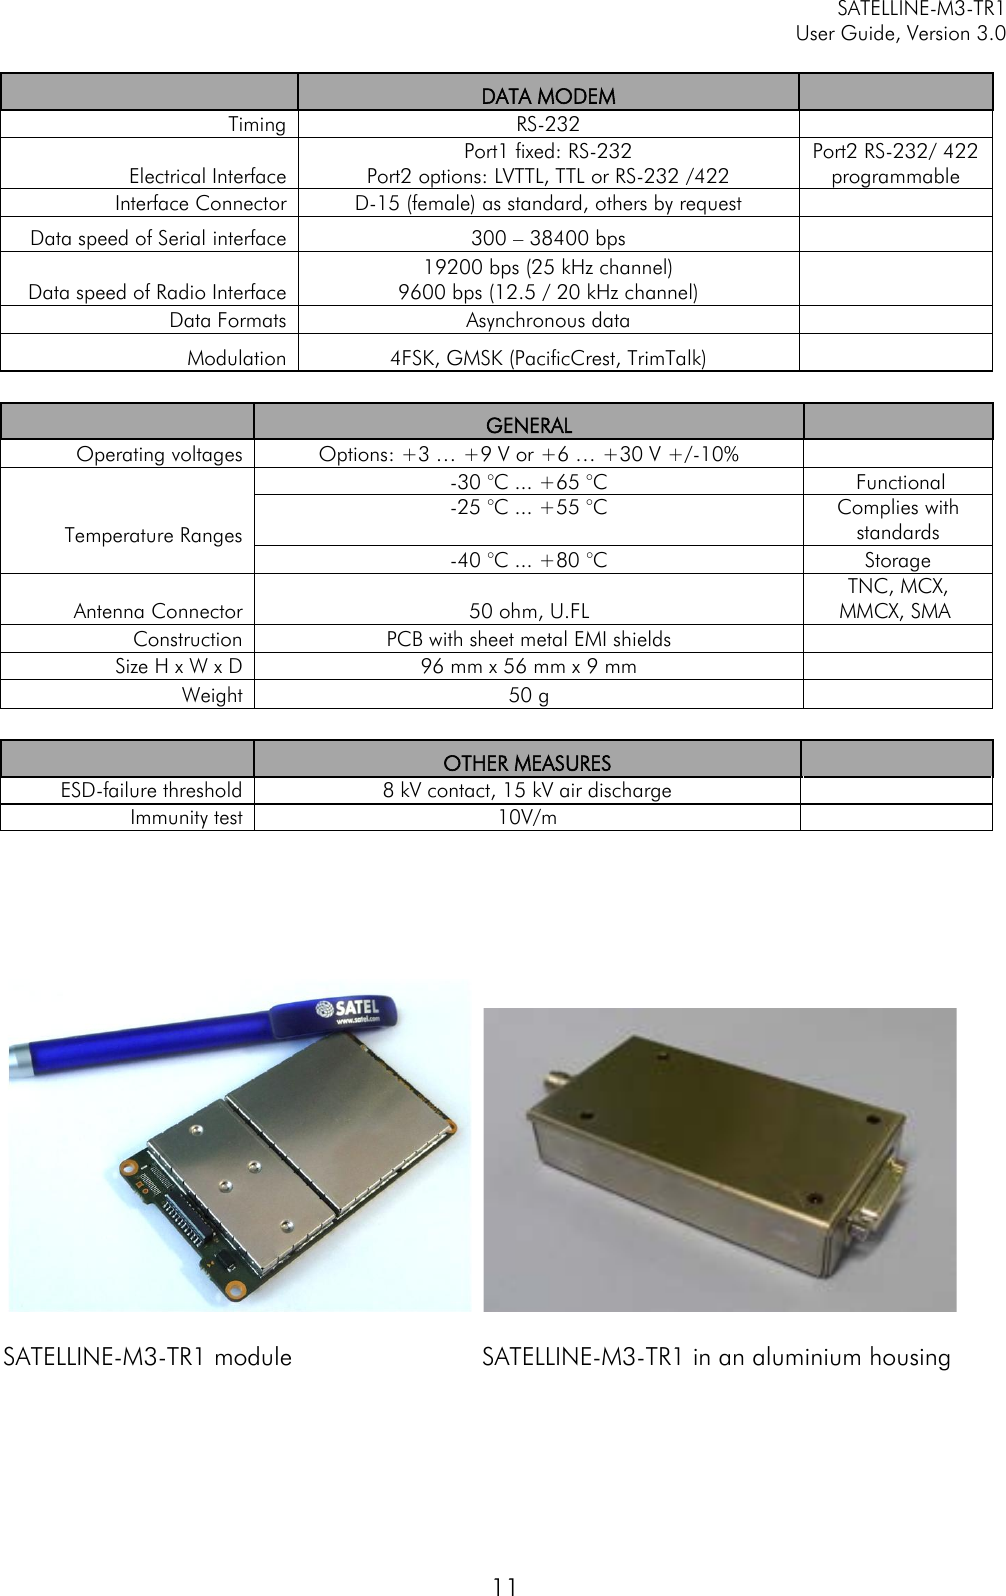     SATELLINE-M3-TR1     User Guide, Version 3.0  11    DATA MODEM    Timing RS-232  Electrical Interface             Port1 fixed: RS-232 Port2 options: LVTTL, TTL or RS-232 /422 Port2 RS-232/ 422 programmable Interface Connector  D-15 (female) as standard, others by request   Data speed of Serial interface 300 – 38400 bps    Data speed of Radio Interface 19200 bps (25 kHz channel)  9600 bps (12.5 / 20 kHz channel)    Data Formats  Asynchronous data   Modulation  4FSK, GMSK (PacificCrest, TrimTalk)    GENERAL   Operating voltages Options: +3 … +9 V or +6 … +30 V +/-10%  Temperature Ranges  -30 °C ... +65 °C  Functional -25 °C ... +55 °C  Complies with standards -40 °C ... +80 °C Storage Antenna Connector 50 ohm, U.FL  TNC, MCX, MMCX, SMA  Construction PCB with sheet metal EMI shields    Size H x W x D 96 mm x 56 mm x 9 mm   Weight 50 g       OTHER MEASURES   ESD-failure threshold 8 kV contact, 15 kV air discharge   Immunity test 10V/m           SATELLINE-M3-TR1 module       SATELLINE-M3-TR1 in an aluminium housing 